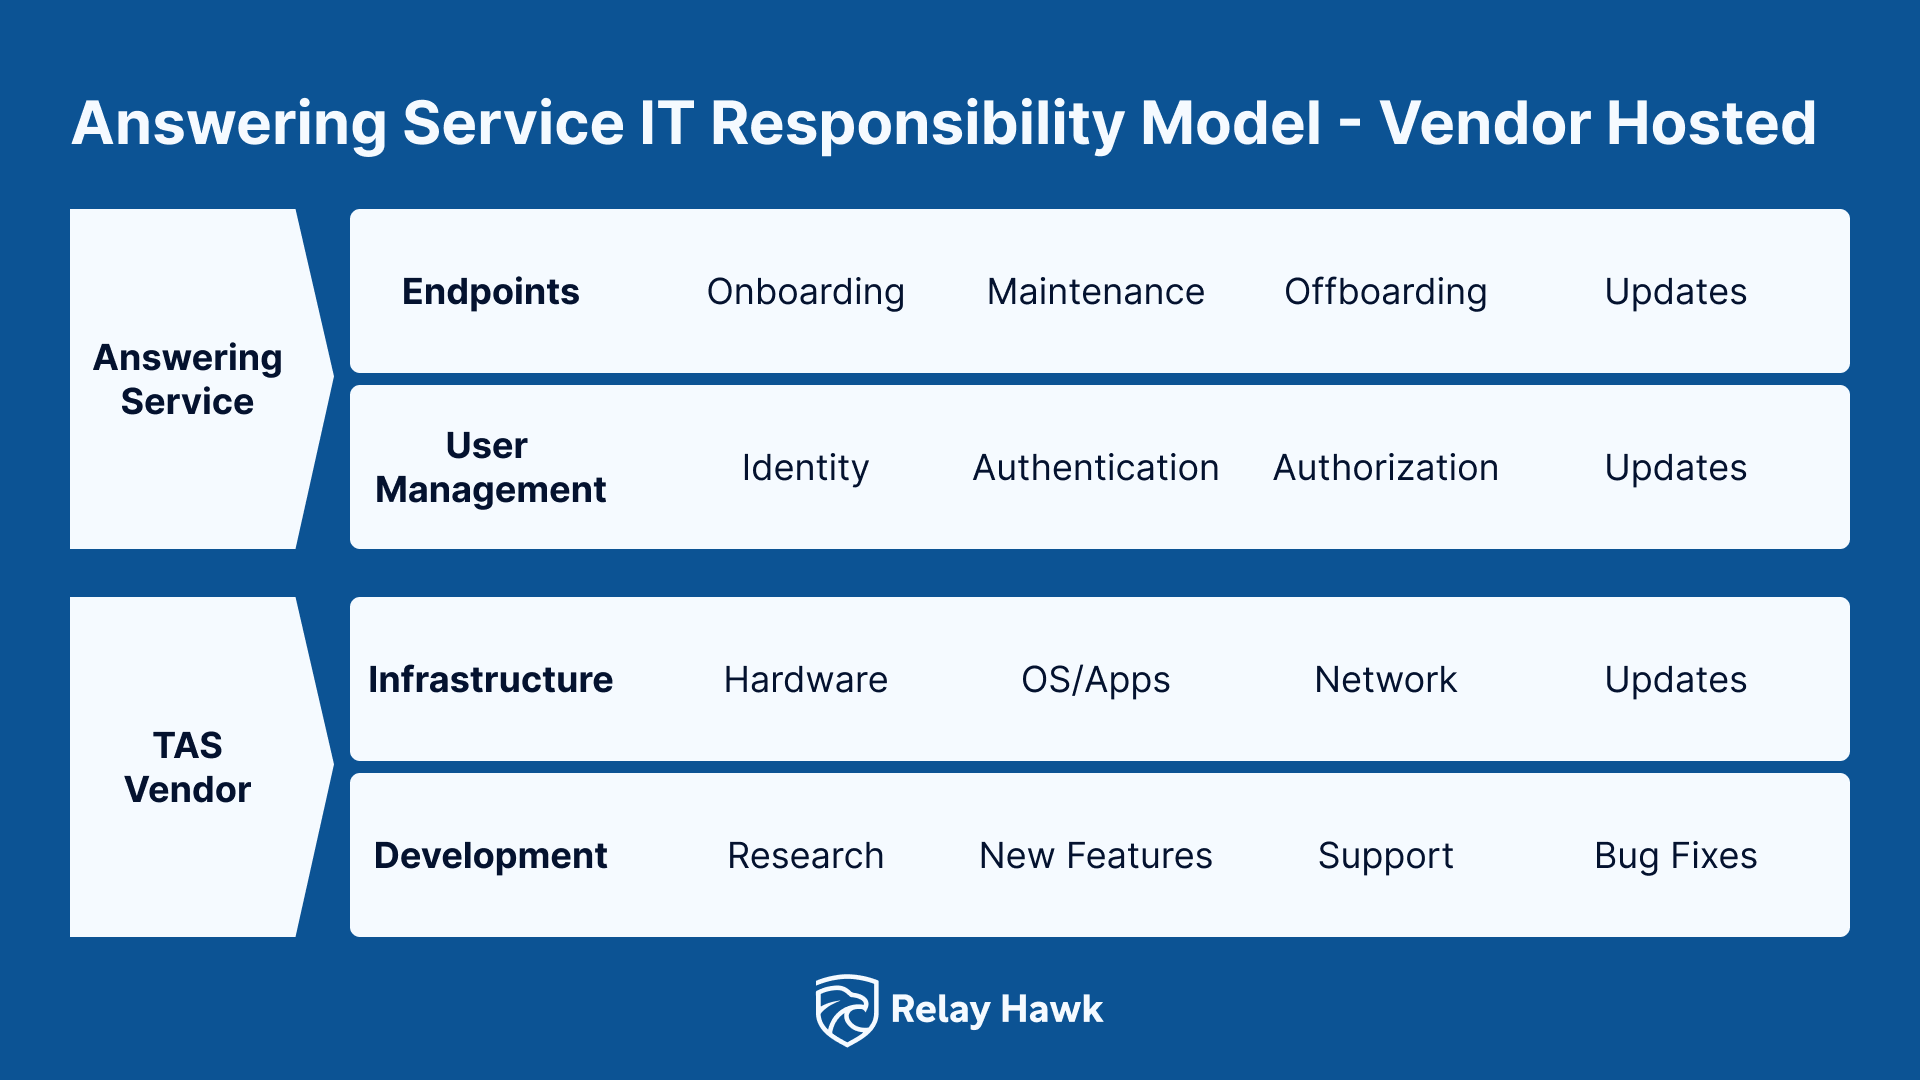 Answering Service IT Responsibility Model - Vendor Hosted